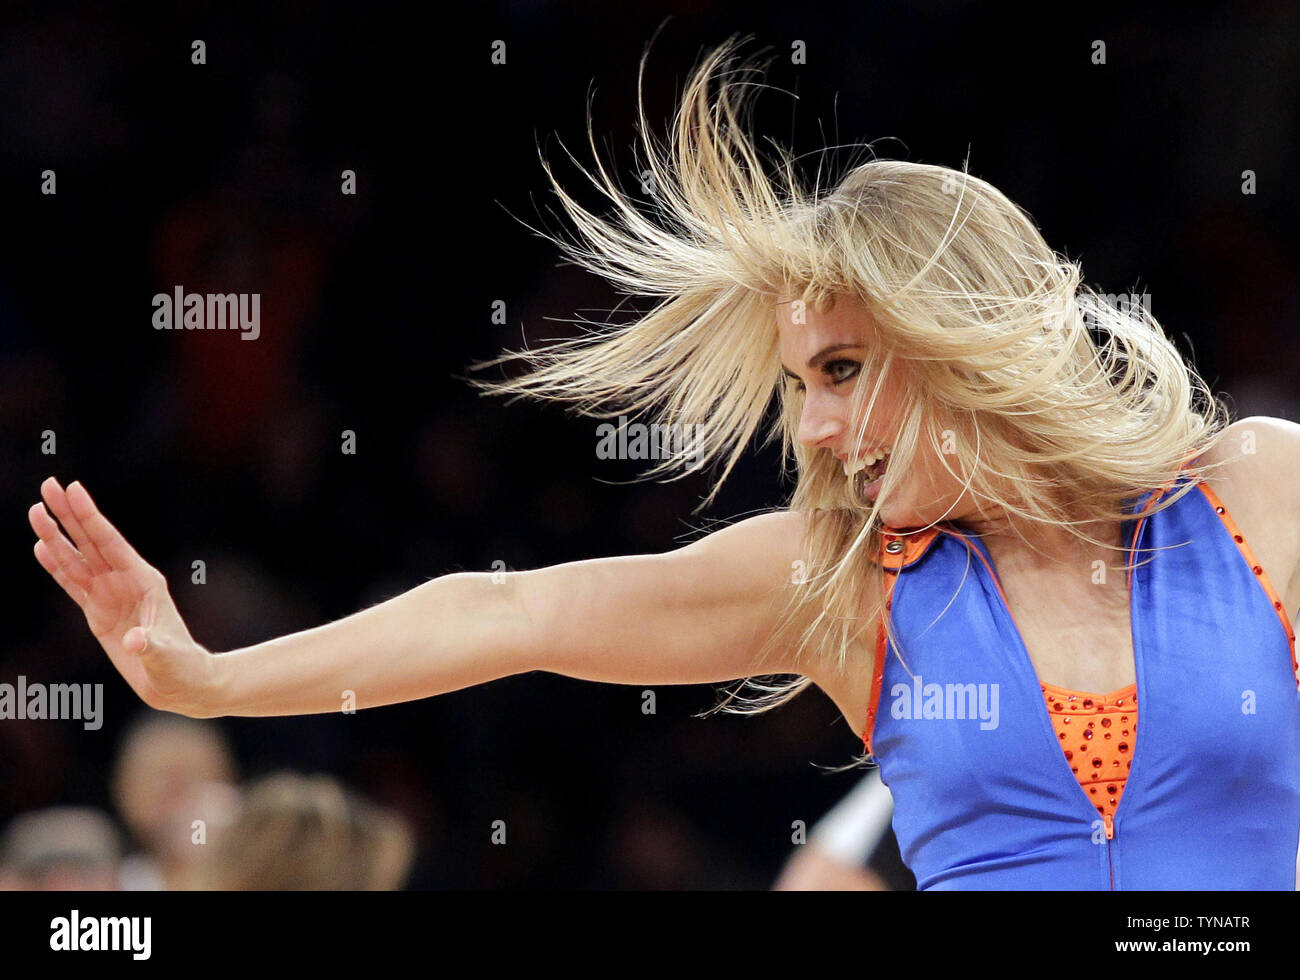 New York Knicks City Dancers cheerleaders perform in the fourth quarter when the New York Knicks play the Indiana Pacers at Madison Square Garden in New York City on November 18, 2012. The Knicks defeated the Pacers 88-76.      UPI/John Angelillo Stock Photo